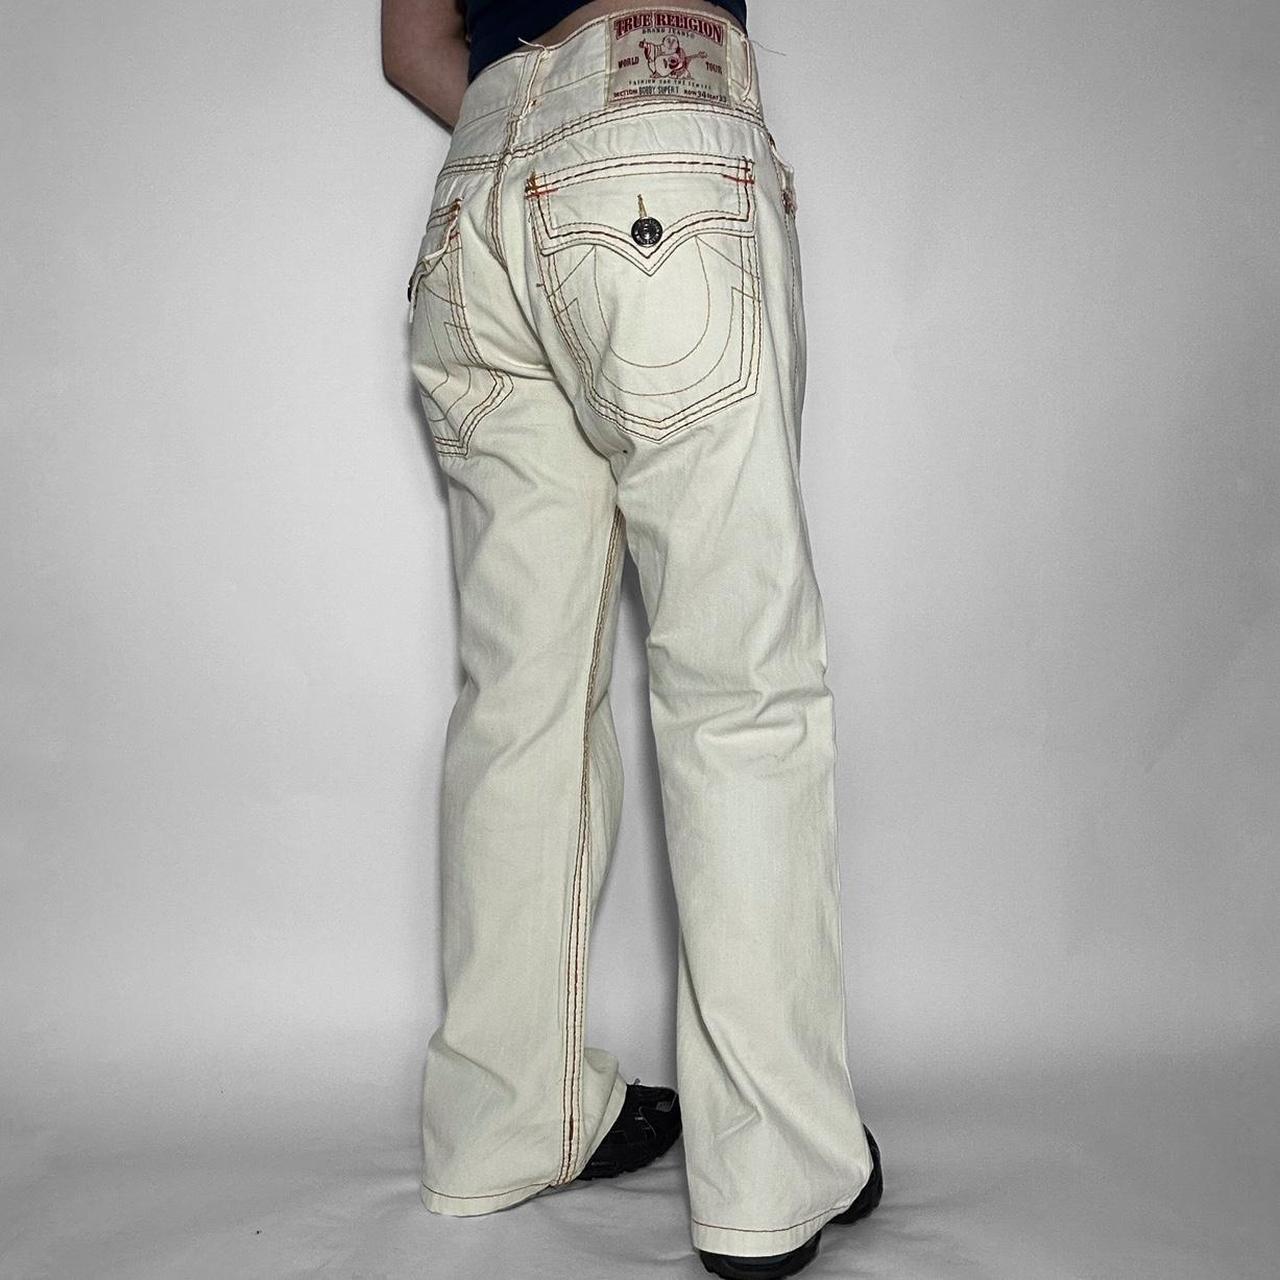 How We Launched True Religion Jeans in a Recession: From Just a Dream to  Millions in Profits - Creative Direct Marketing Group - Product Marketing  Made Easy